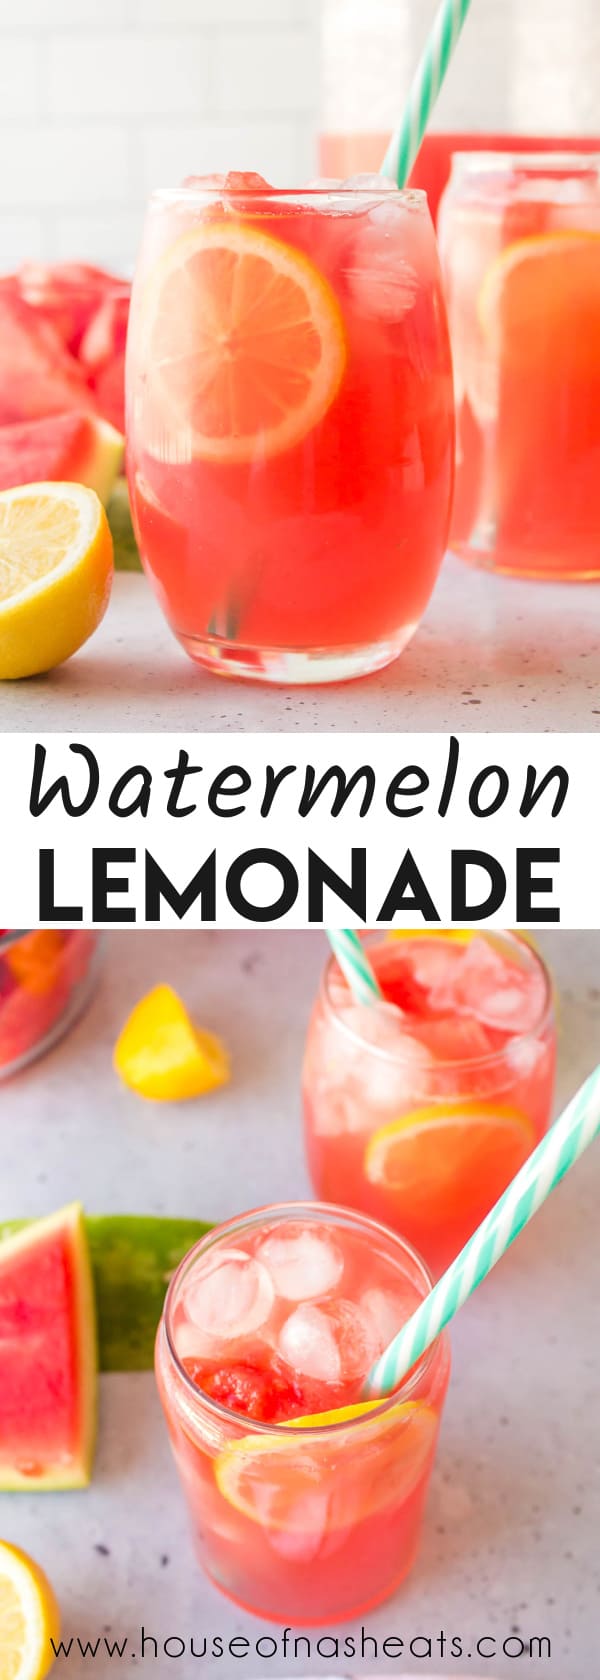 A collage of images of watermelon lemonade with text overlay.